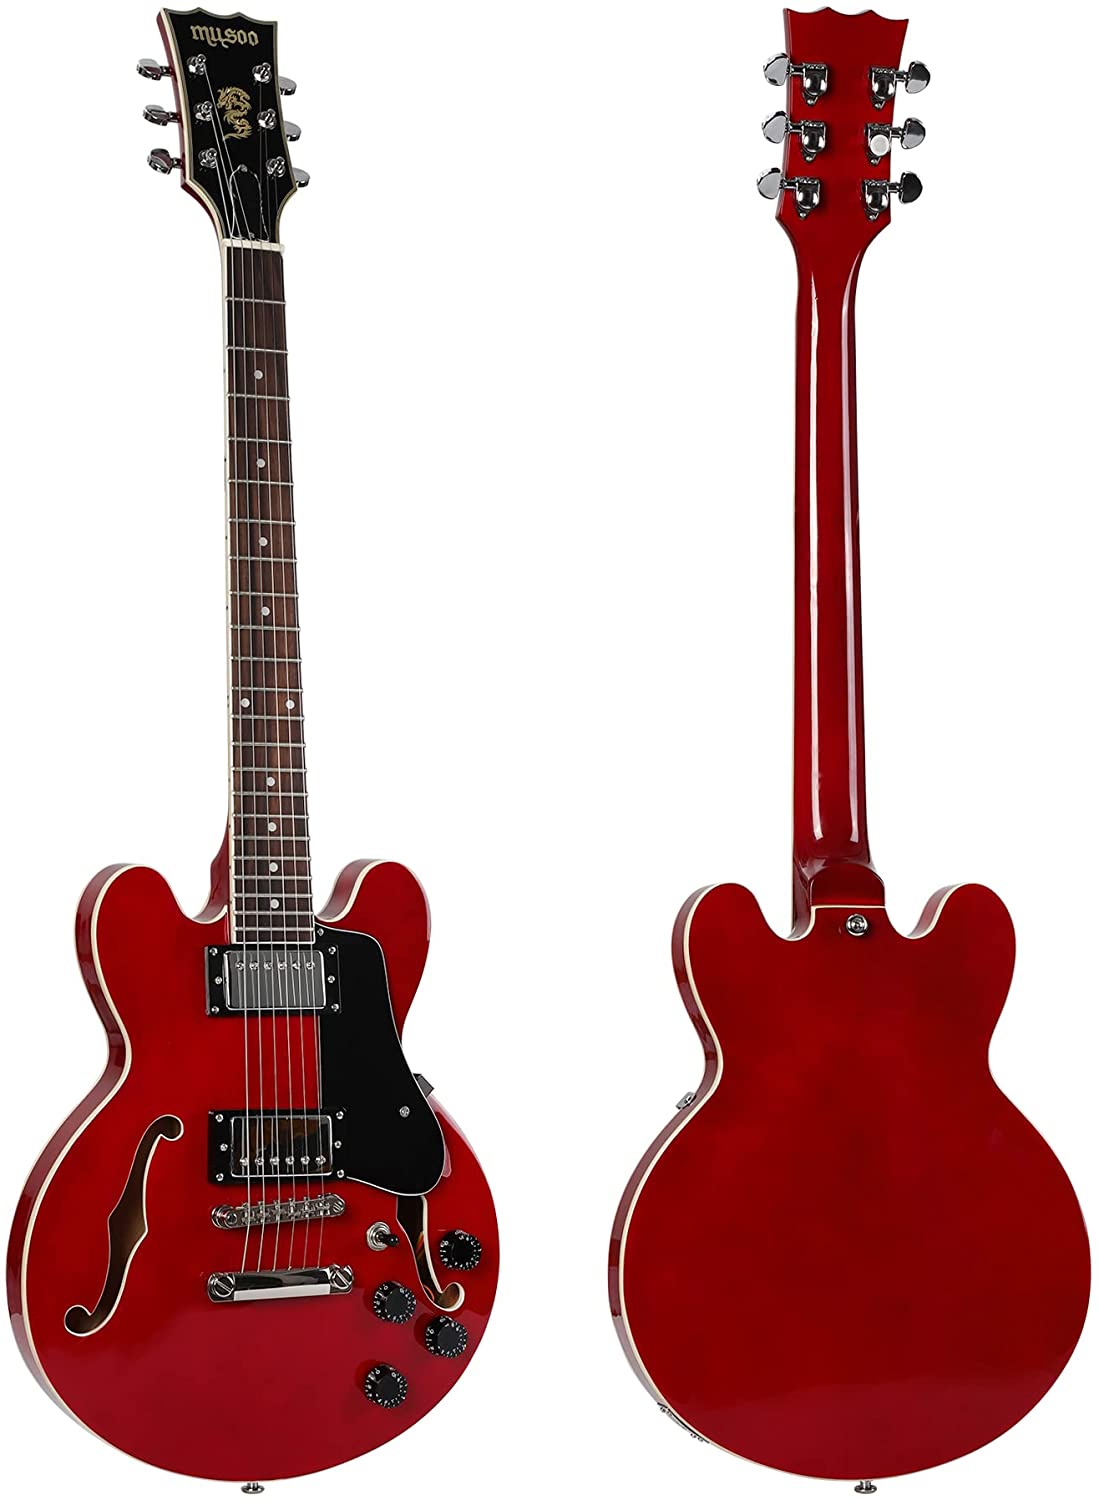 Batking 335 style Jazz Electric Guitar Red Small(EJ01)